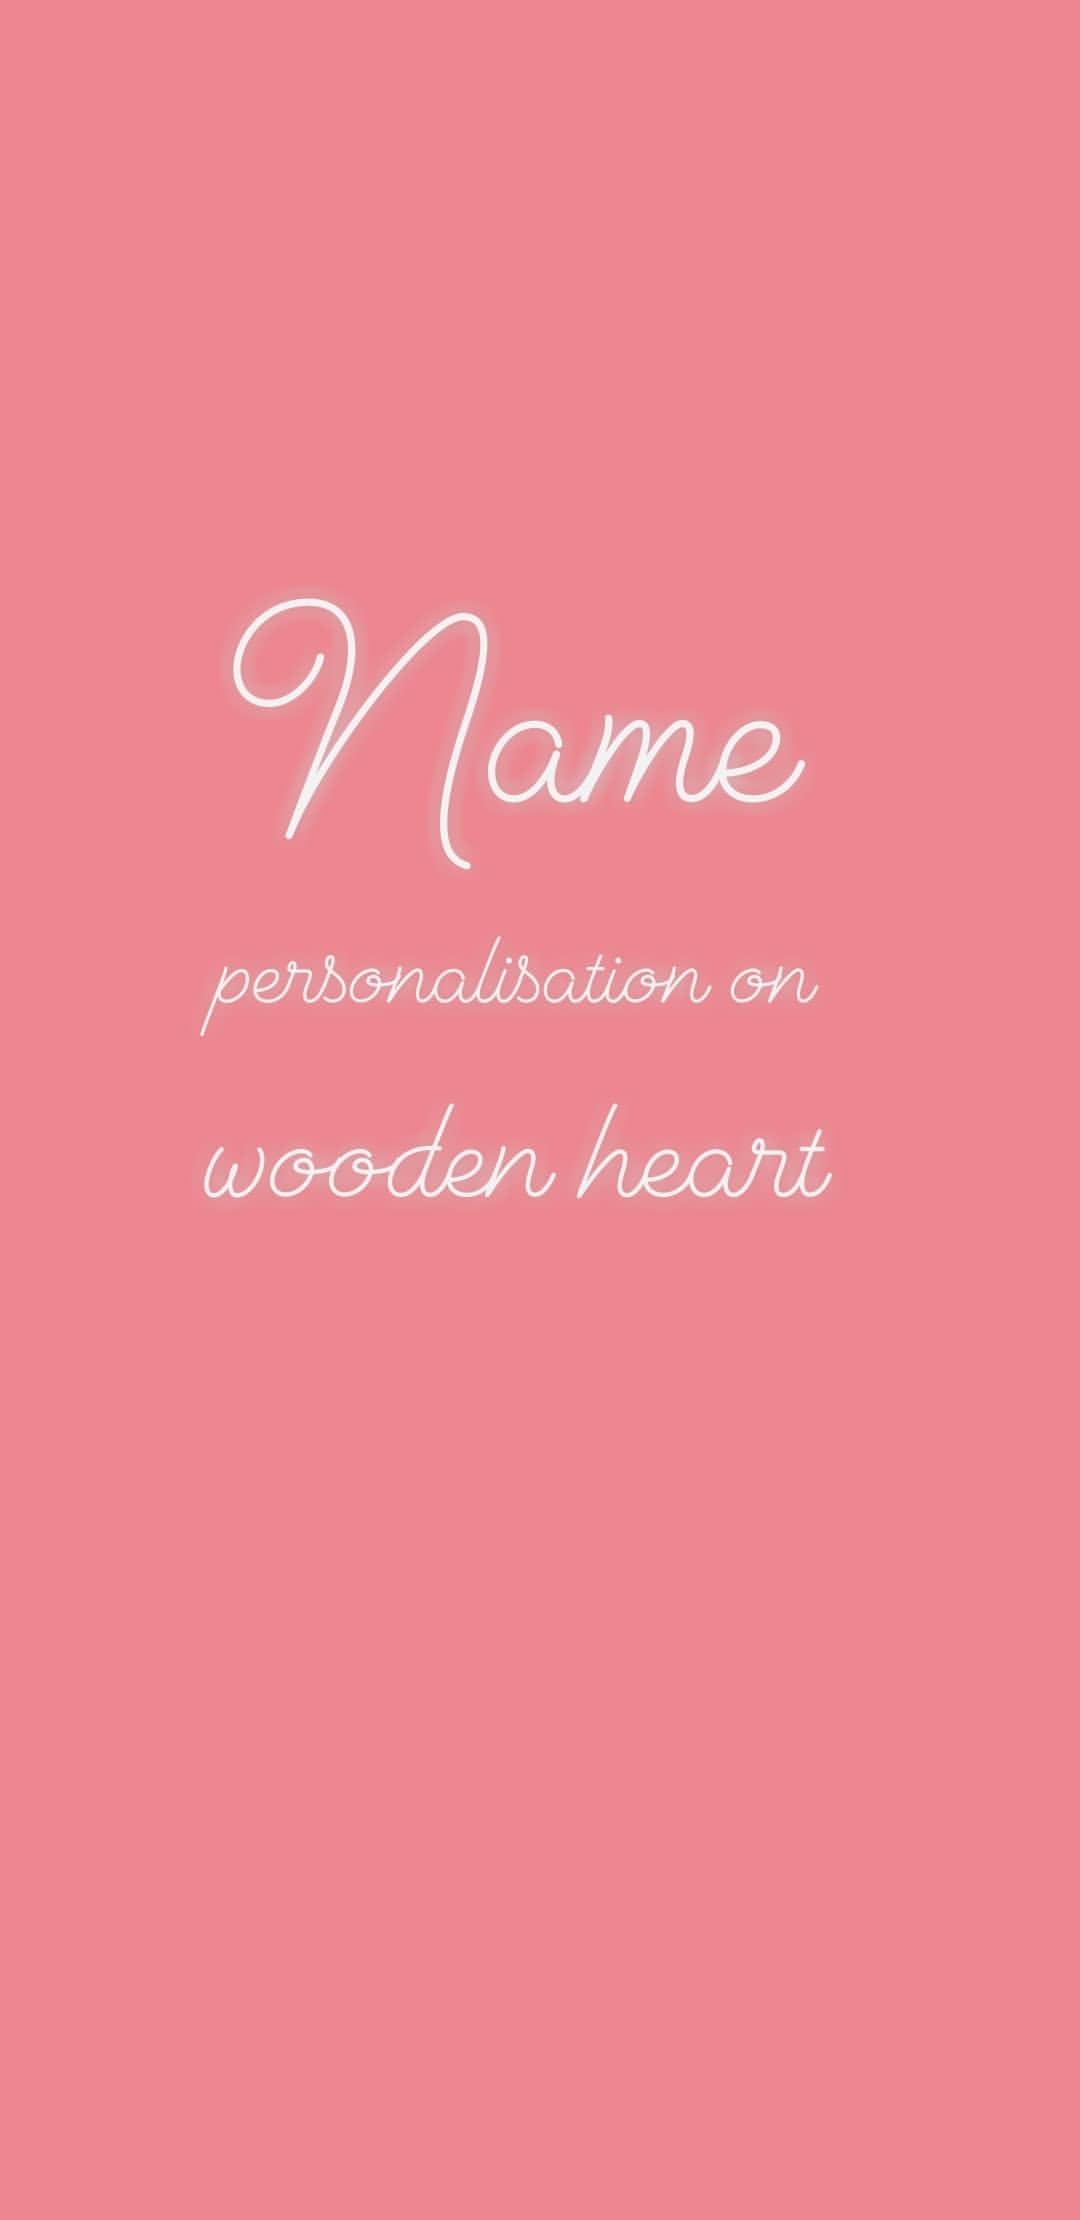 Image of Personalisation on wooden heart